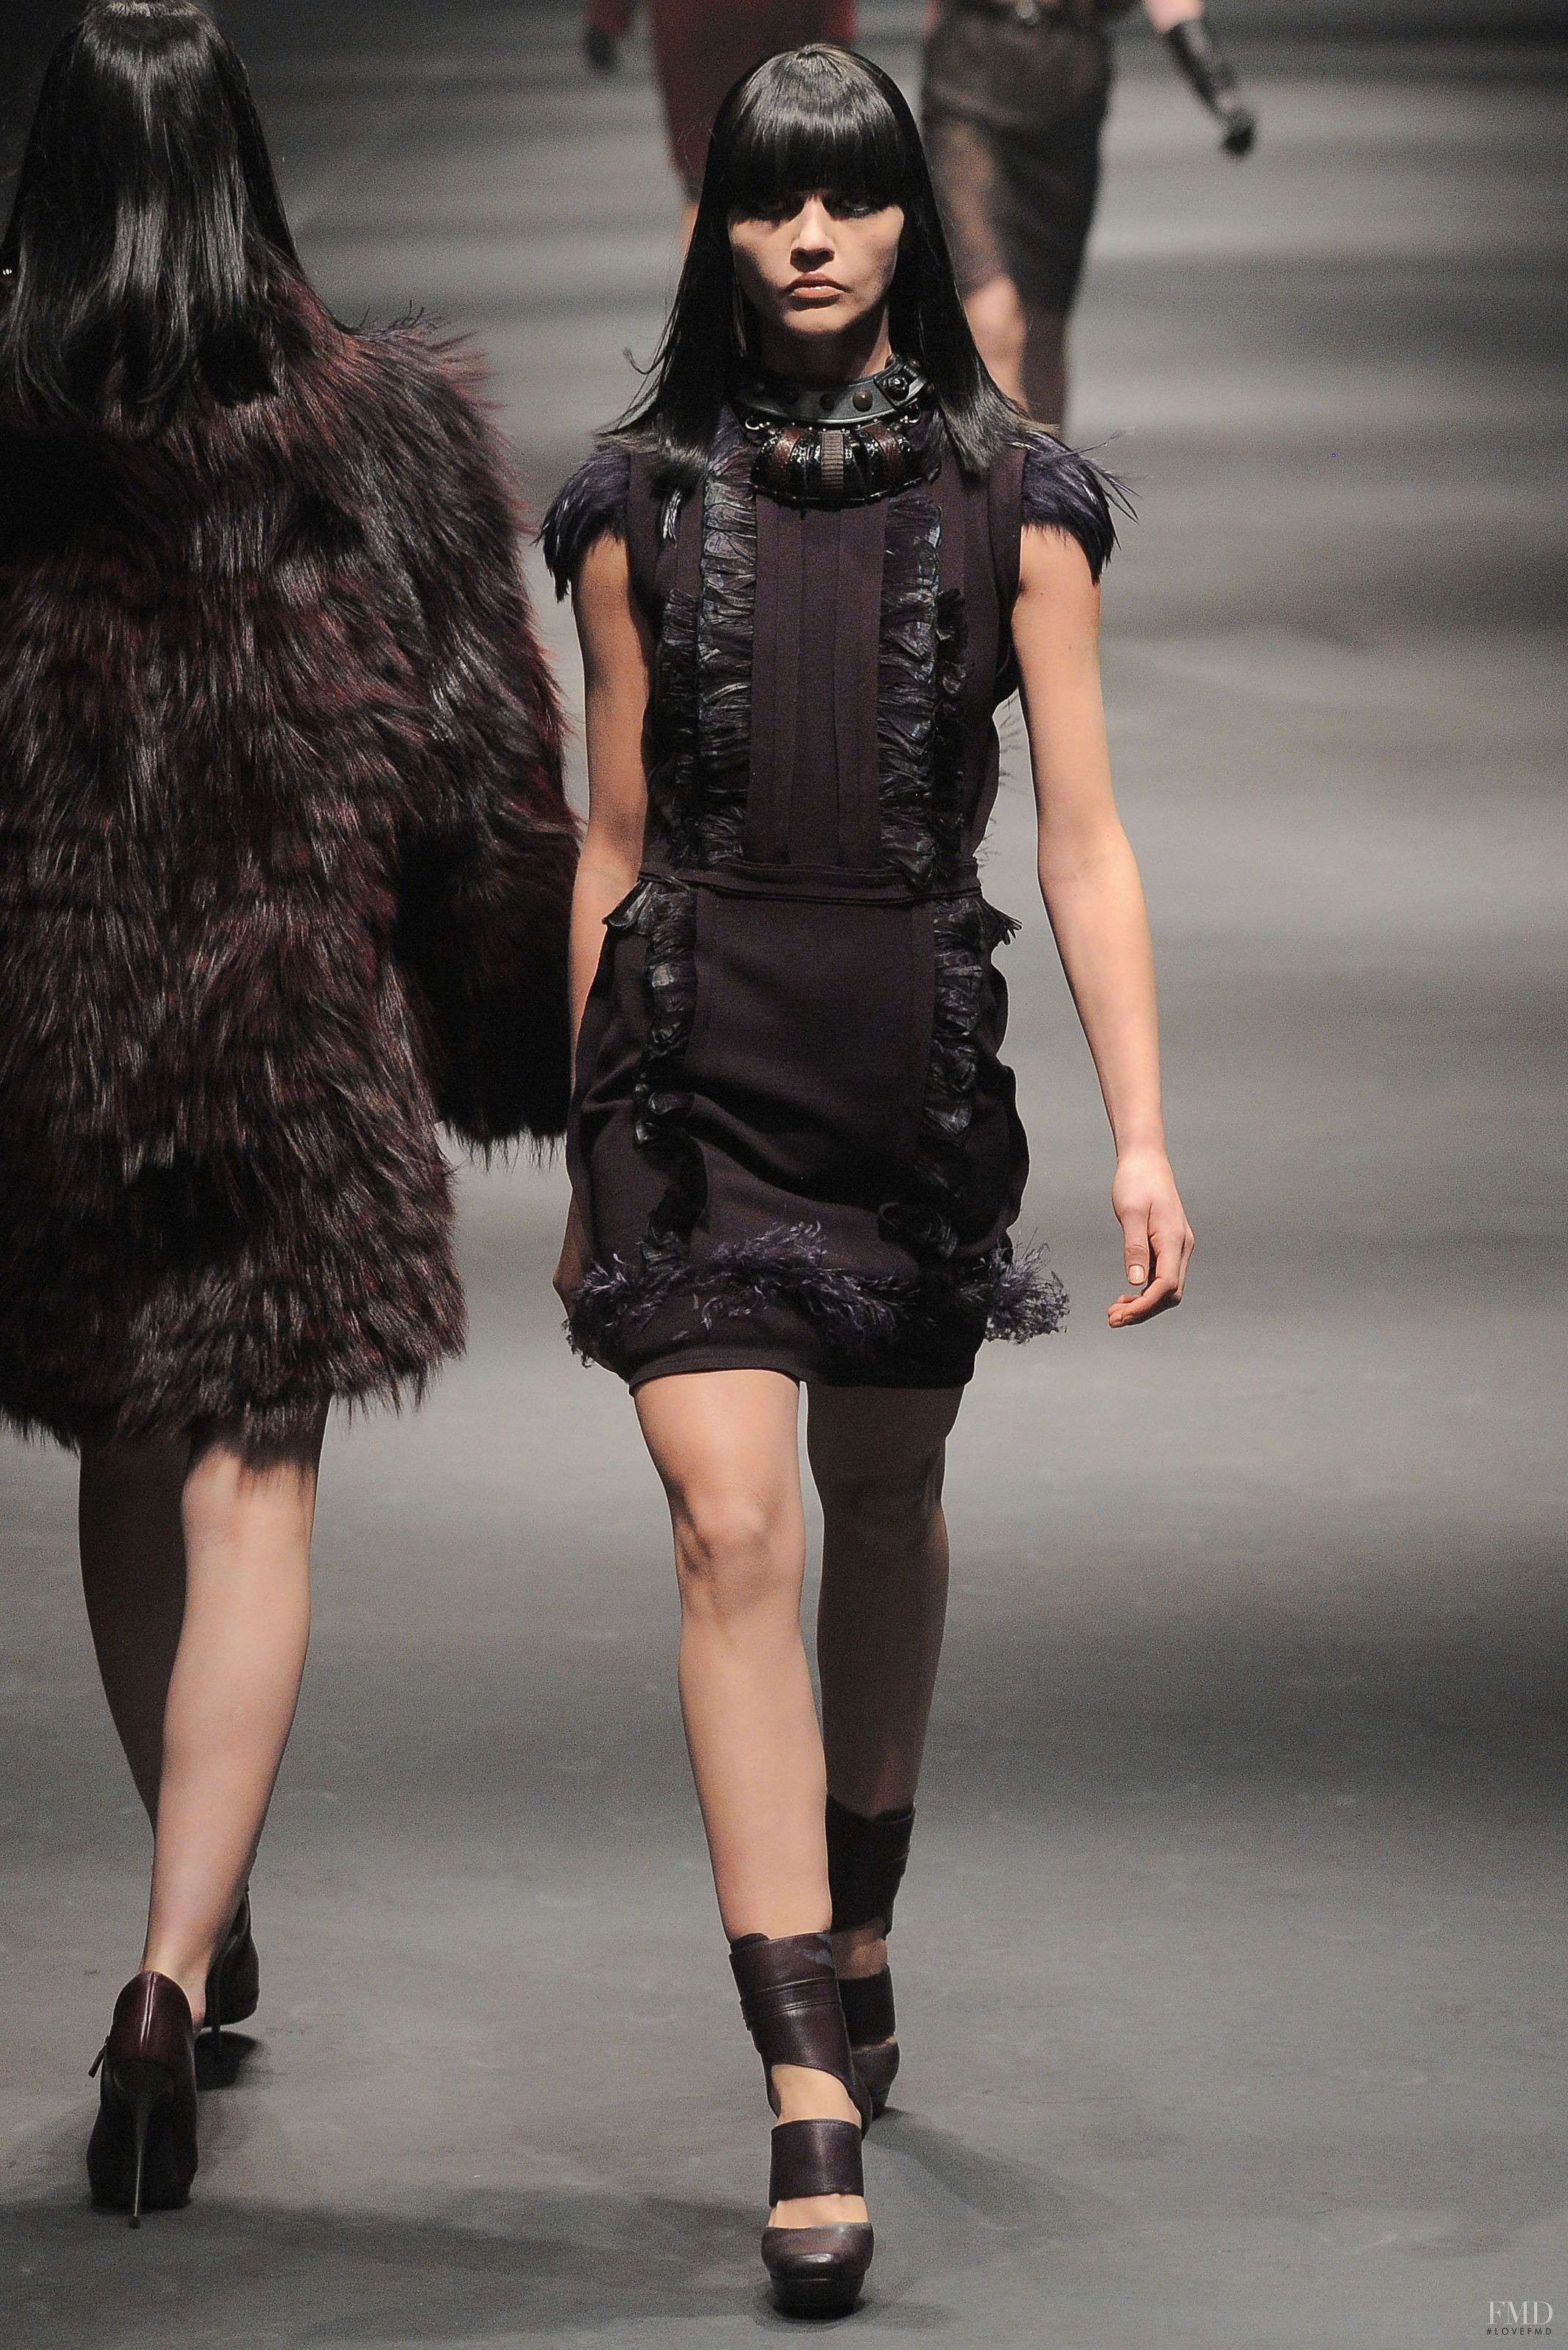 Model Carmen Kass on the runway at the Lanvin fashion show during